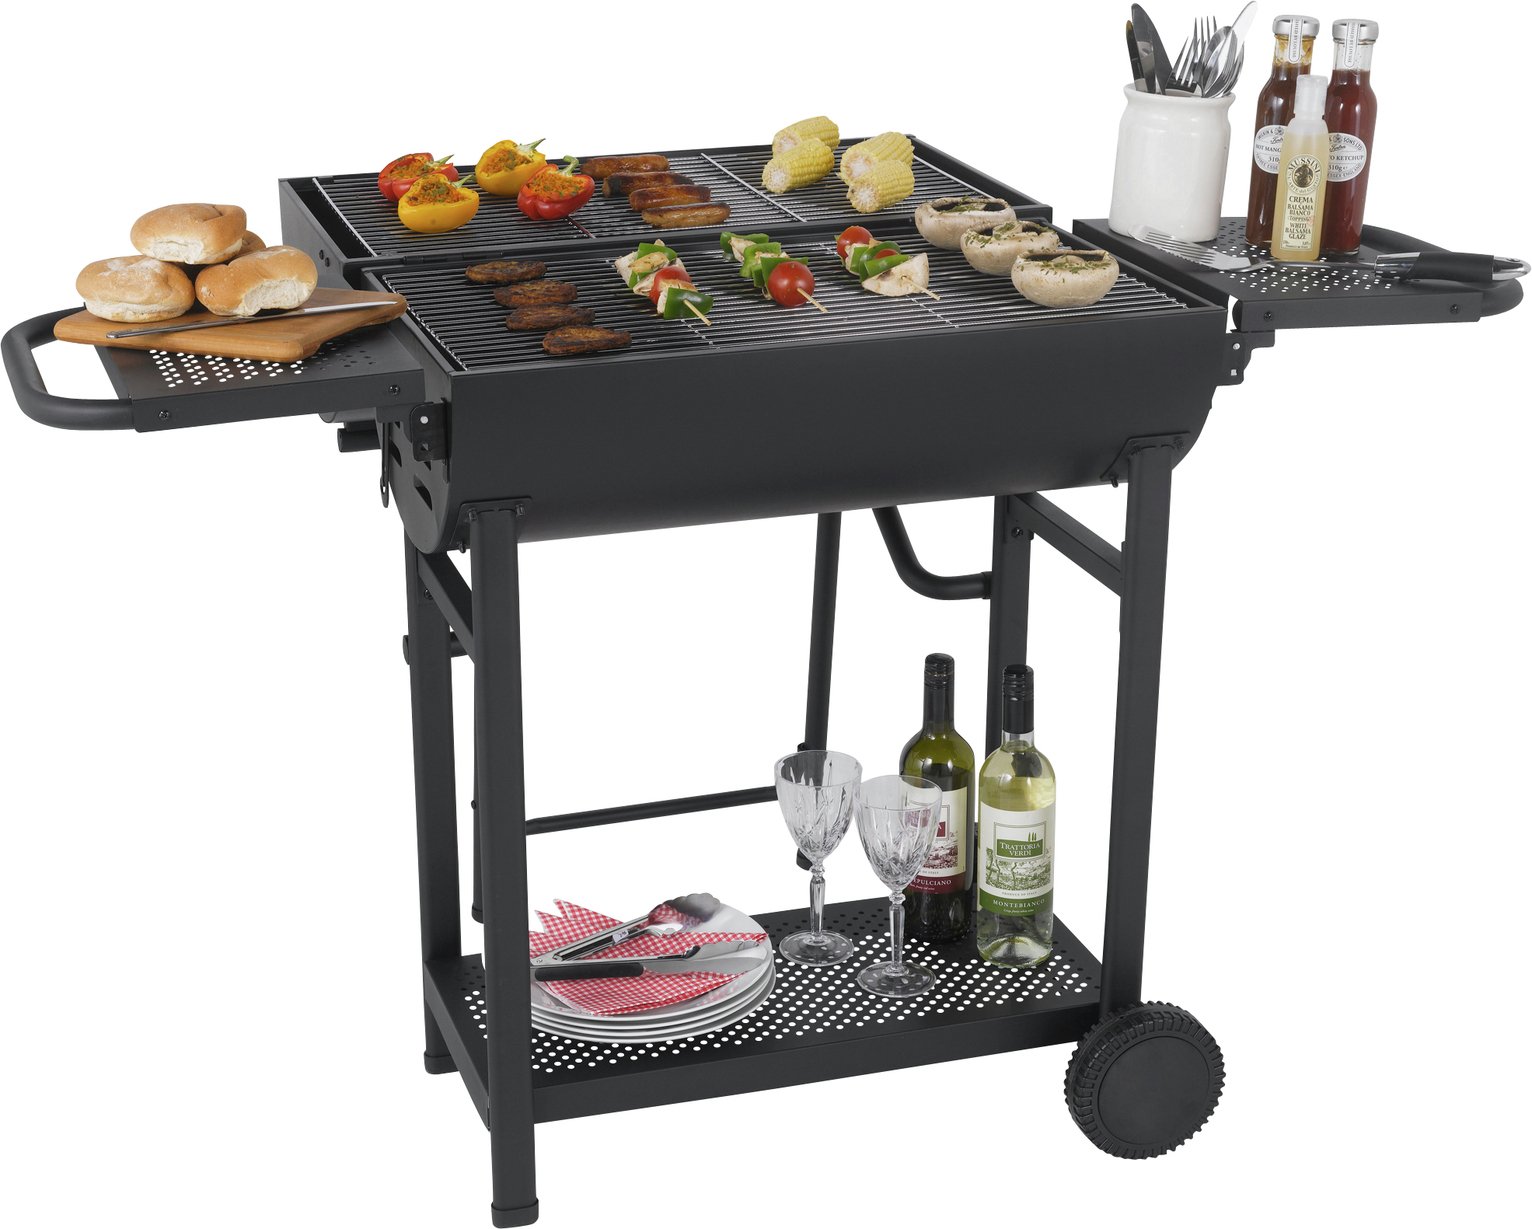 Deluxe Lovo Charcoal Party BBQ at Argos